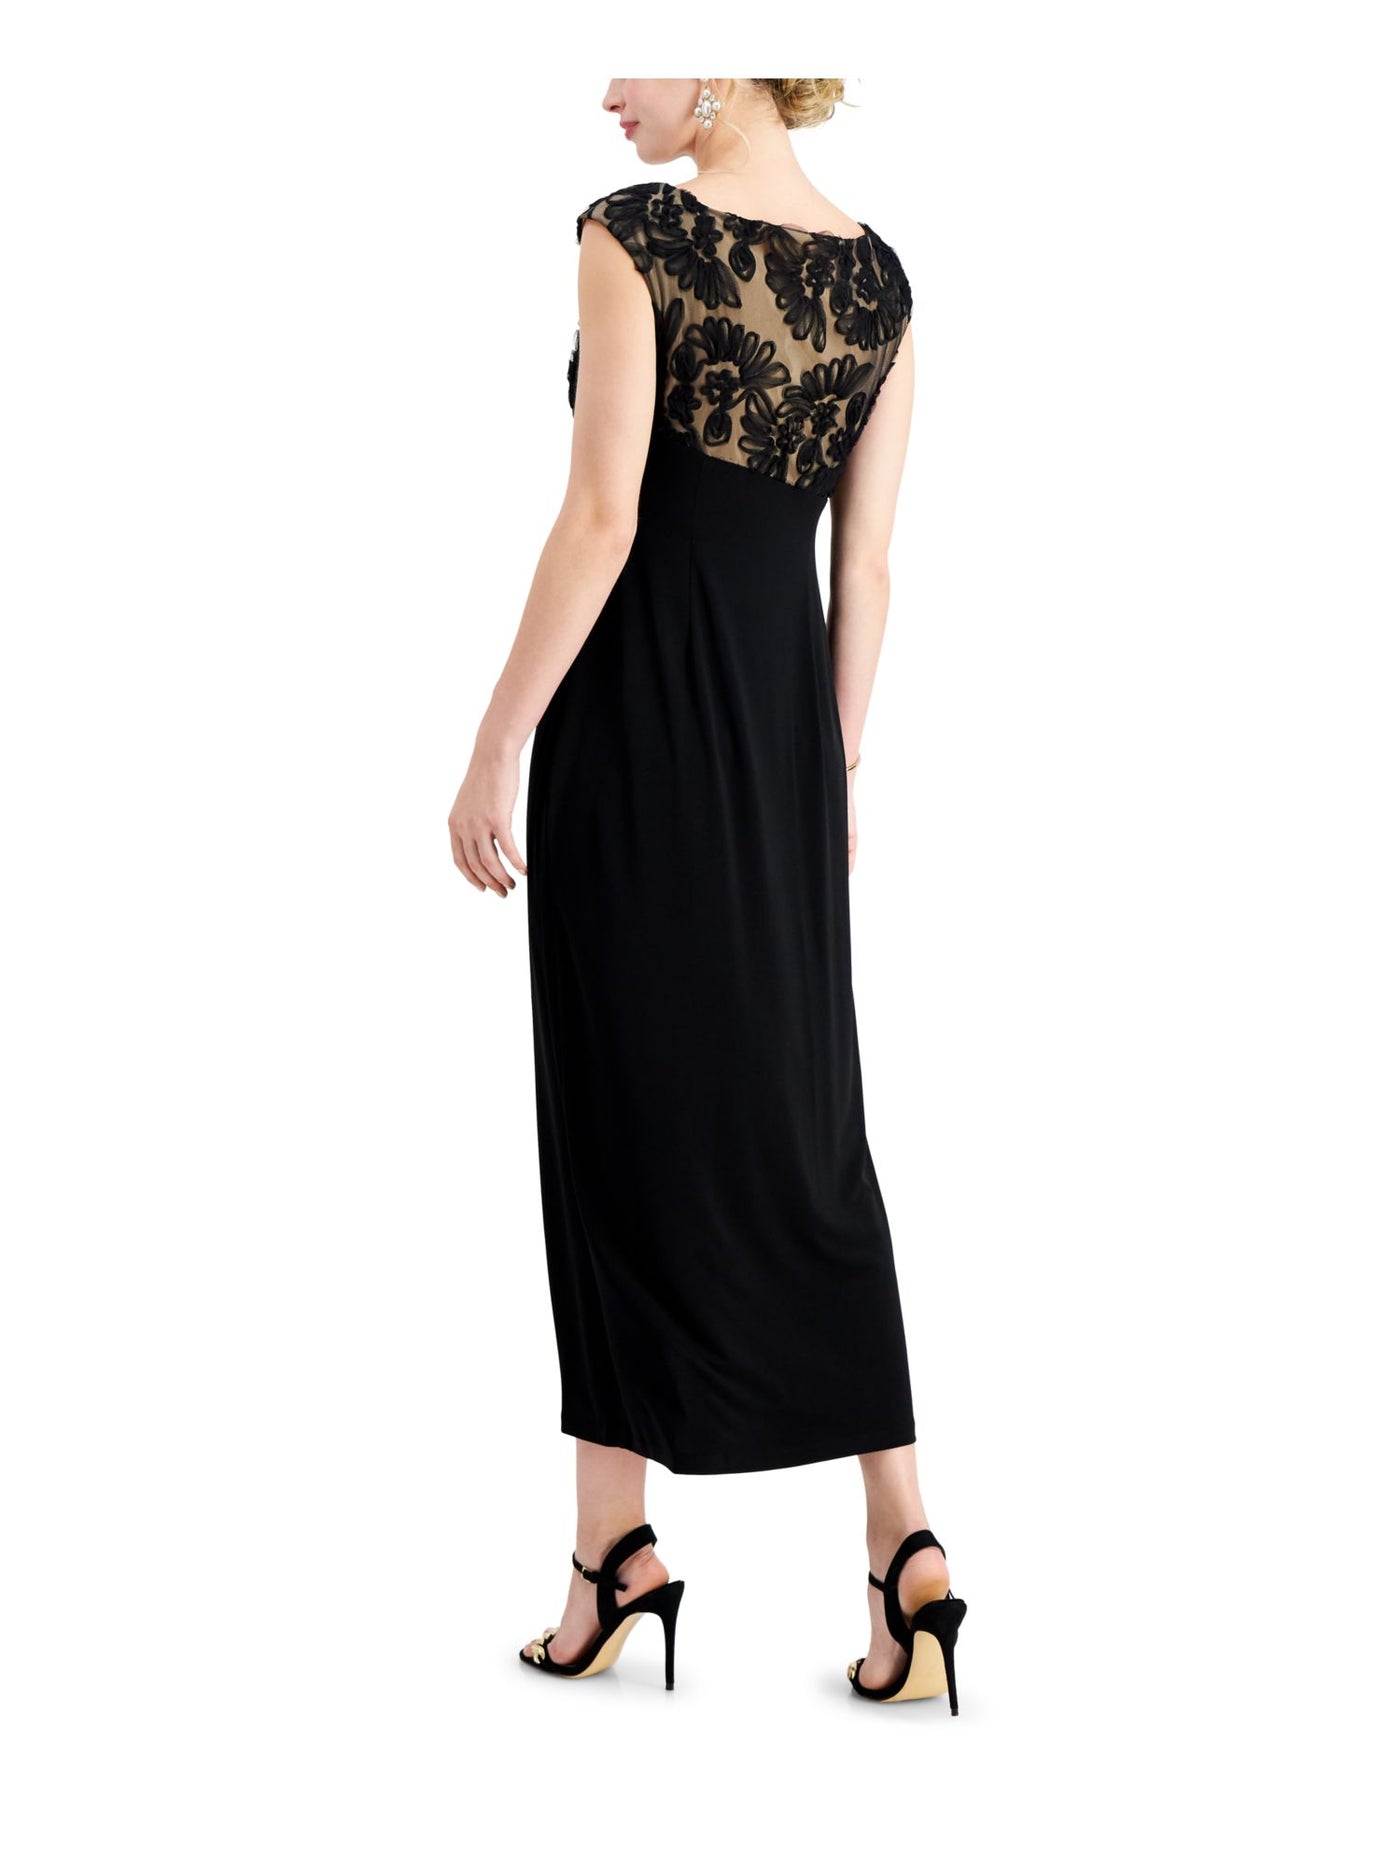 CONNECTED APPAREL Womens Black Lace Gathered At Waist Color Block Cap Sleeve Boat Neck Maxi Formal Tulip Dress Petites 14P